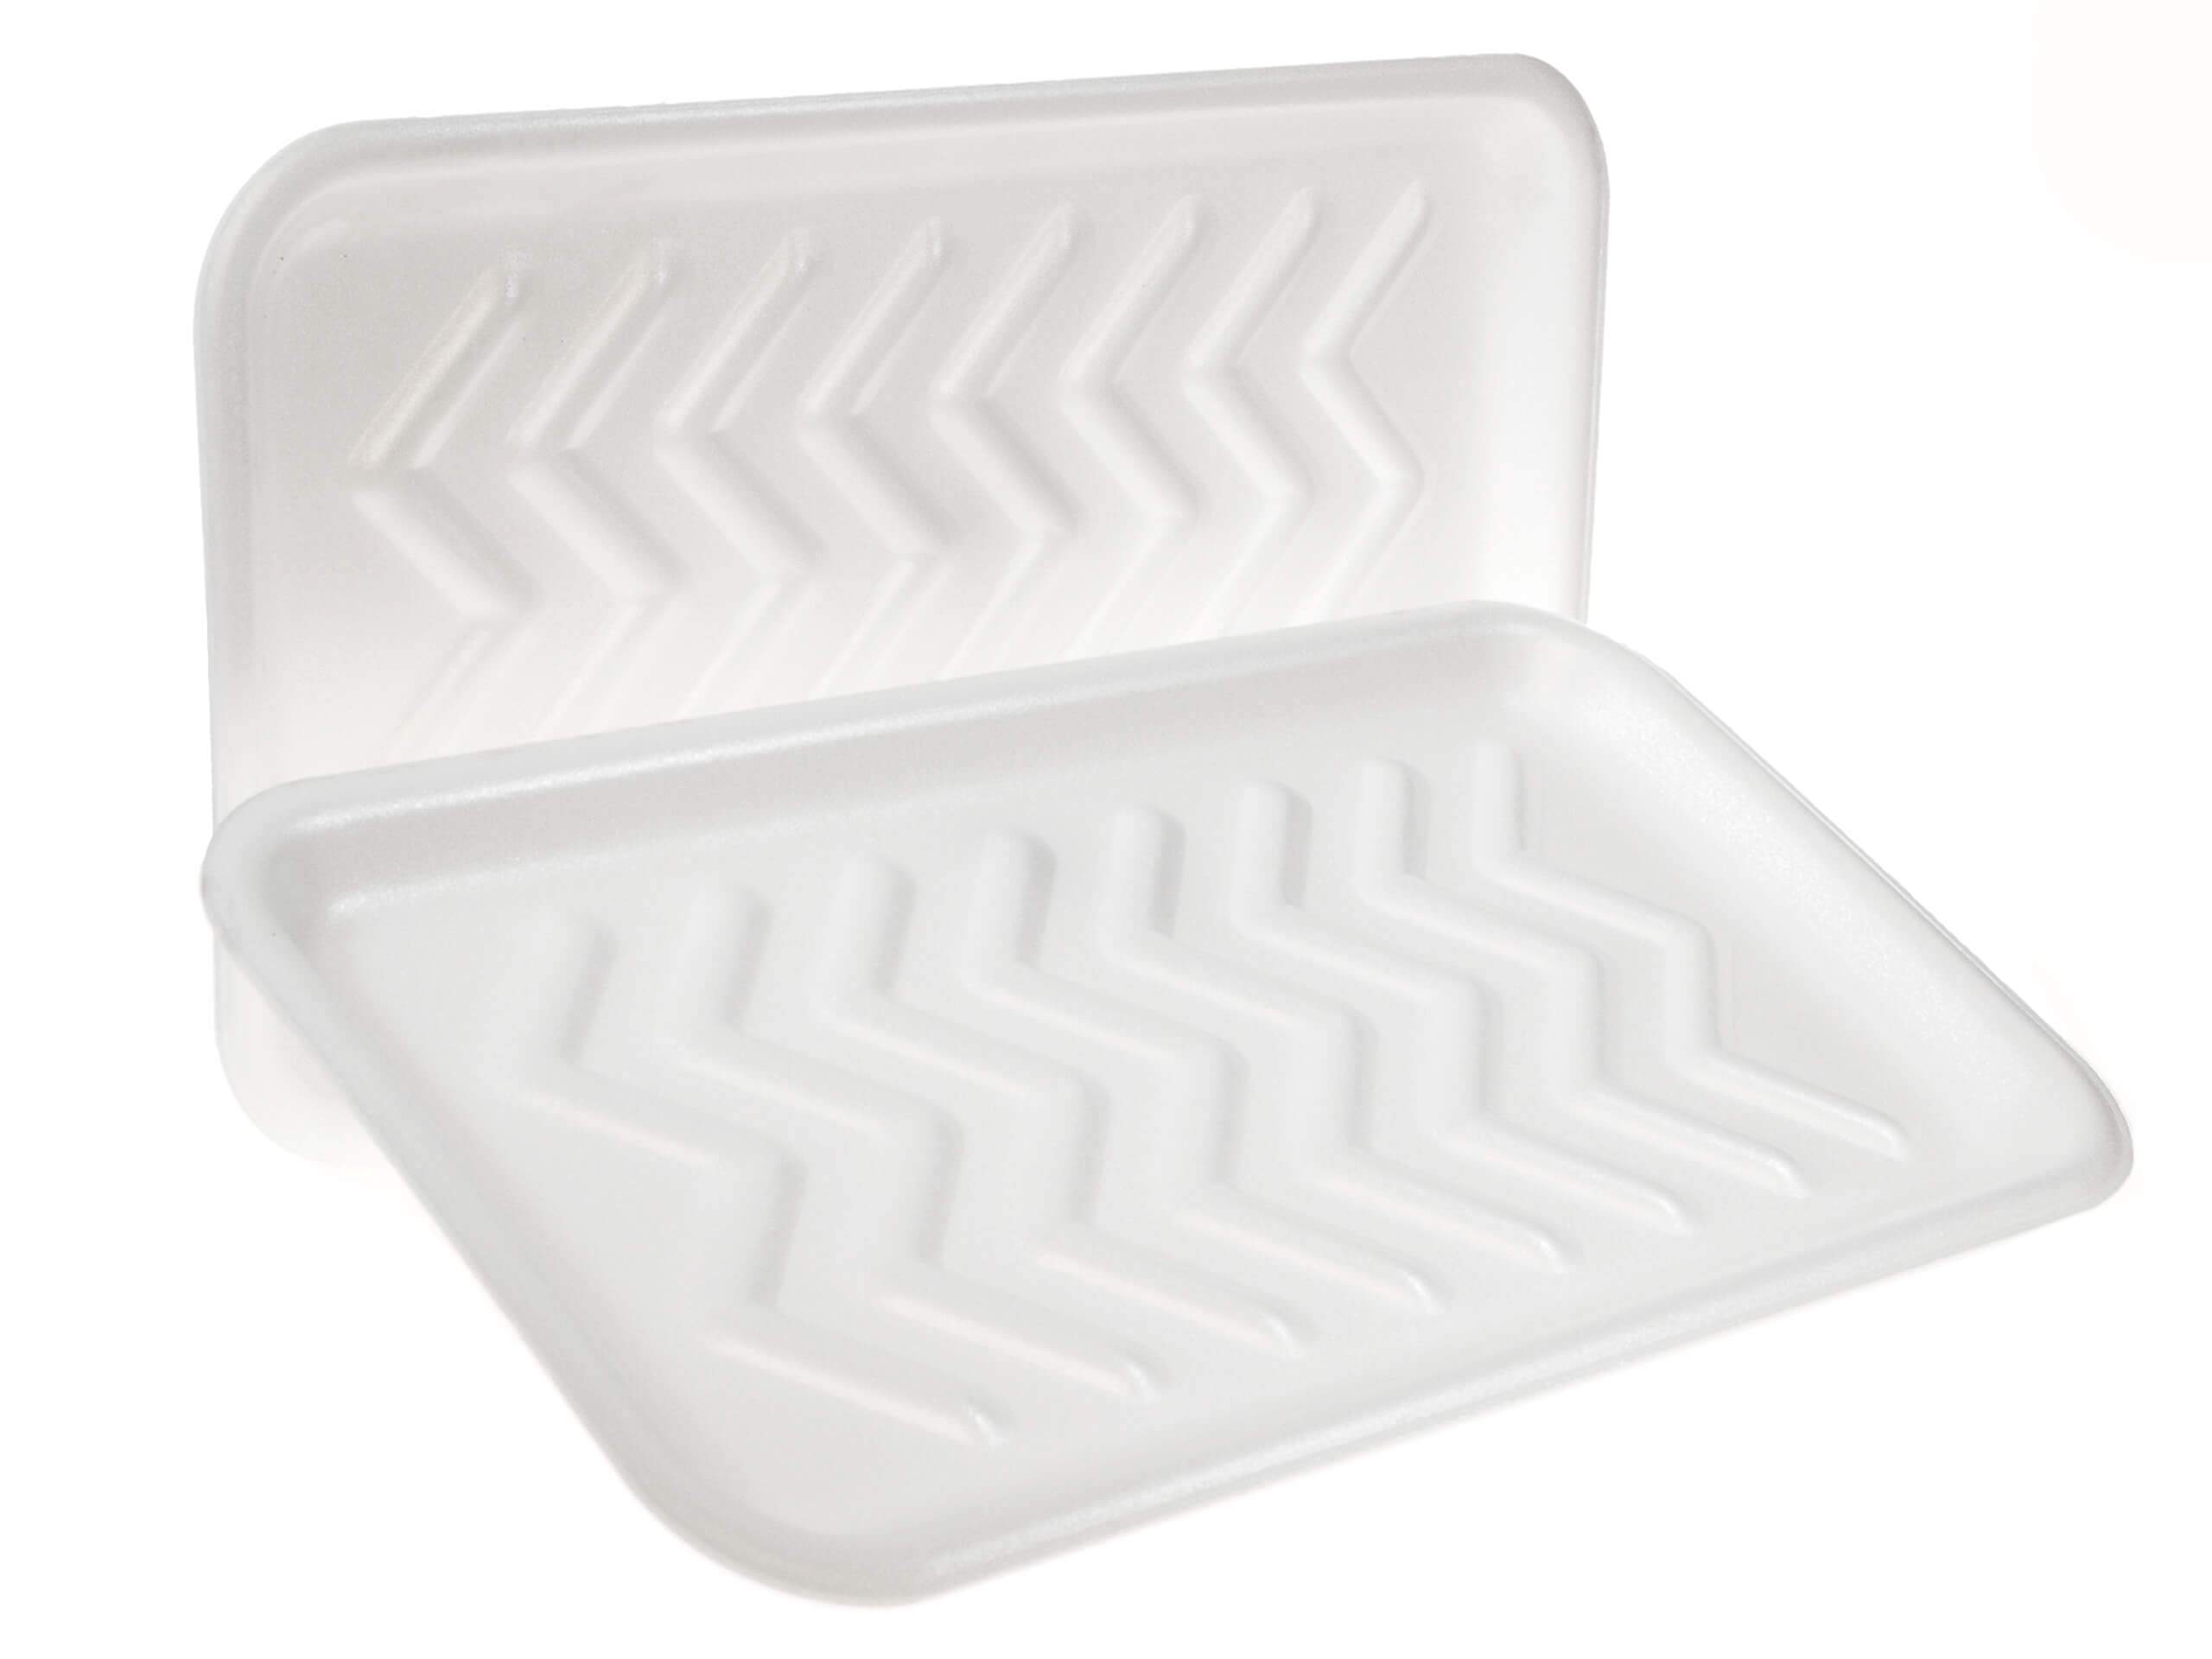 CKF 20SW, 20S White Foam Meat Trays, Disposable